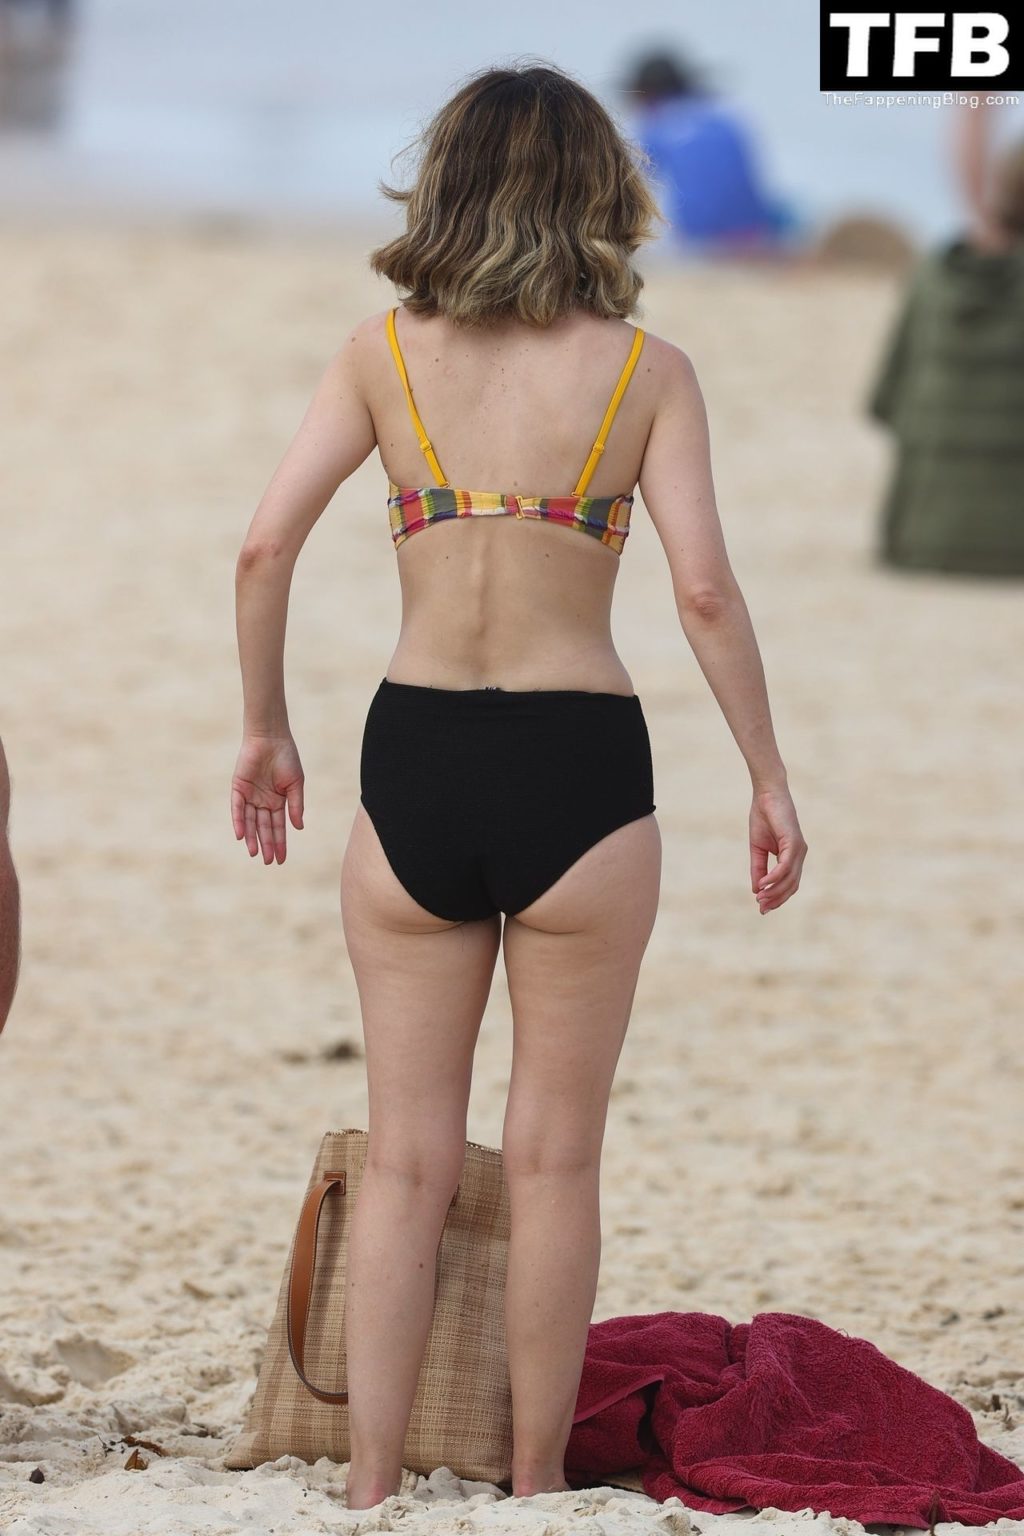 Rose Byrne Sexy The Fappening Blog 27 1024x1536 - Rose Byrne & Kick Gurry Enjoy a Day on the Beach in Sydney (90 Photos)